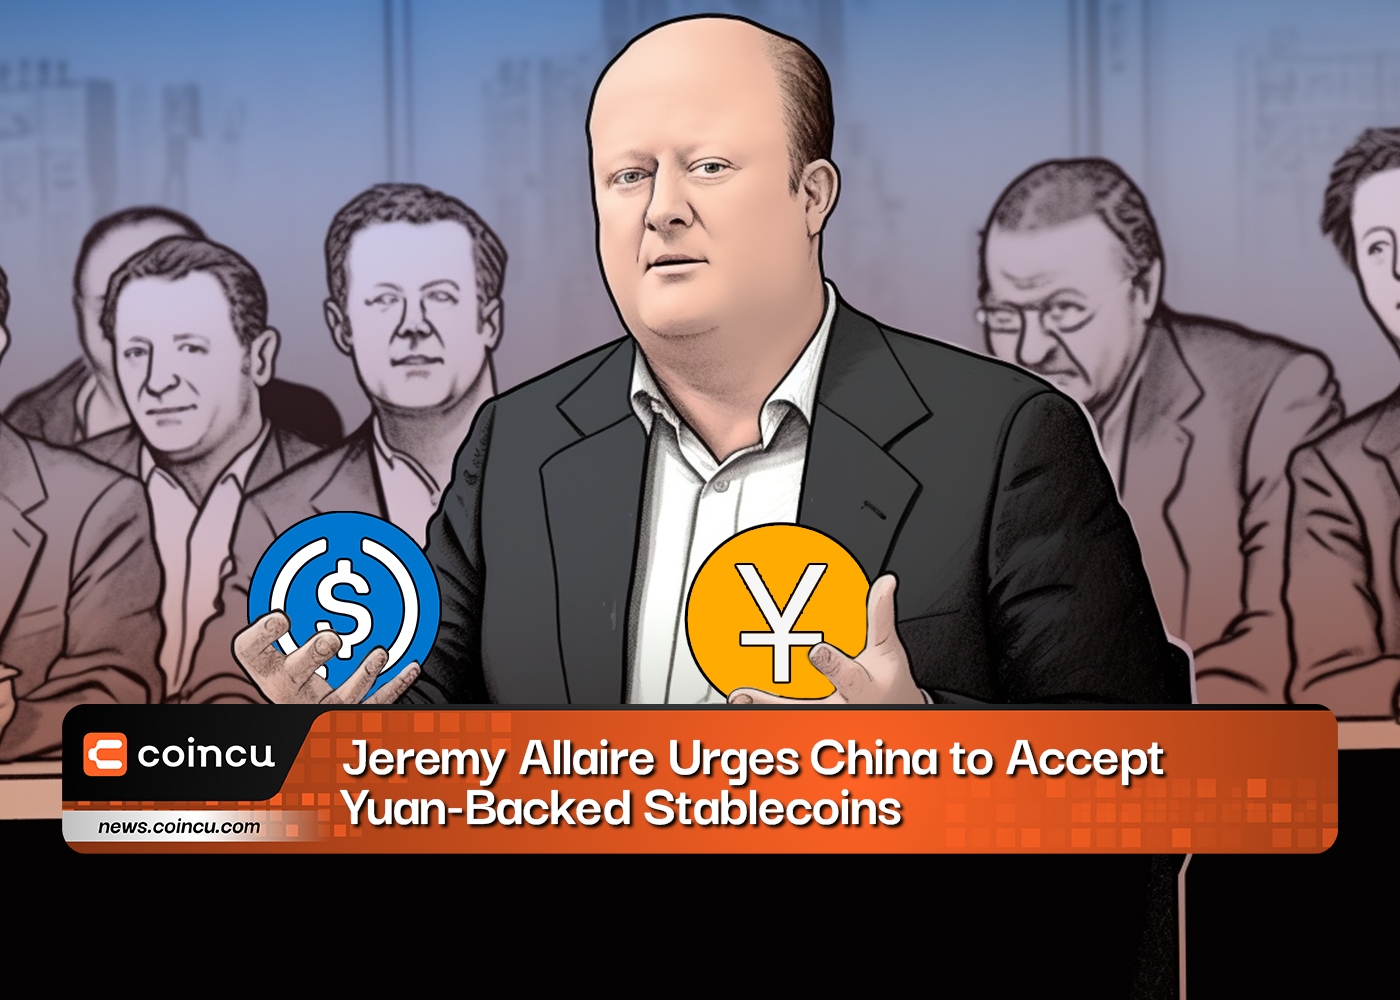 Jeremy Allaire Urges China to AcceptJeremy Allaire Urges China to Accept 1